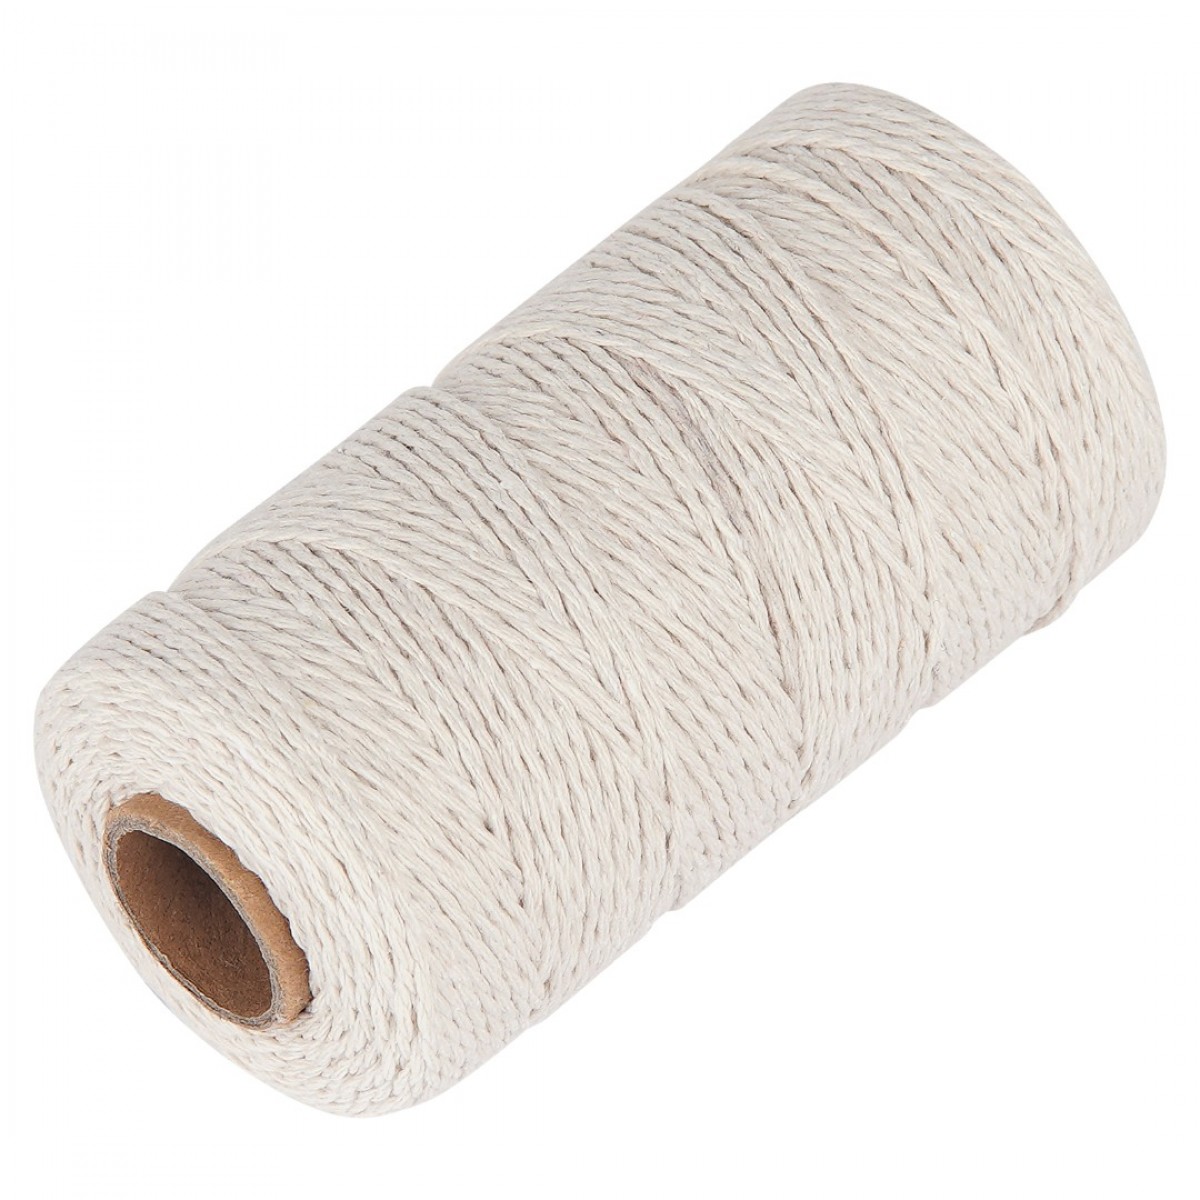 Ohtomber Cotton Butchers Twine String - 